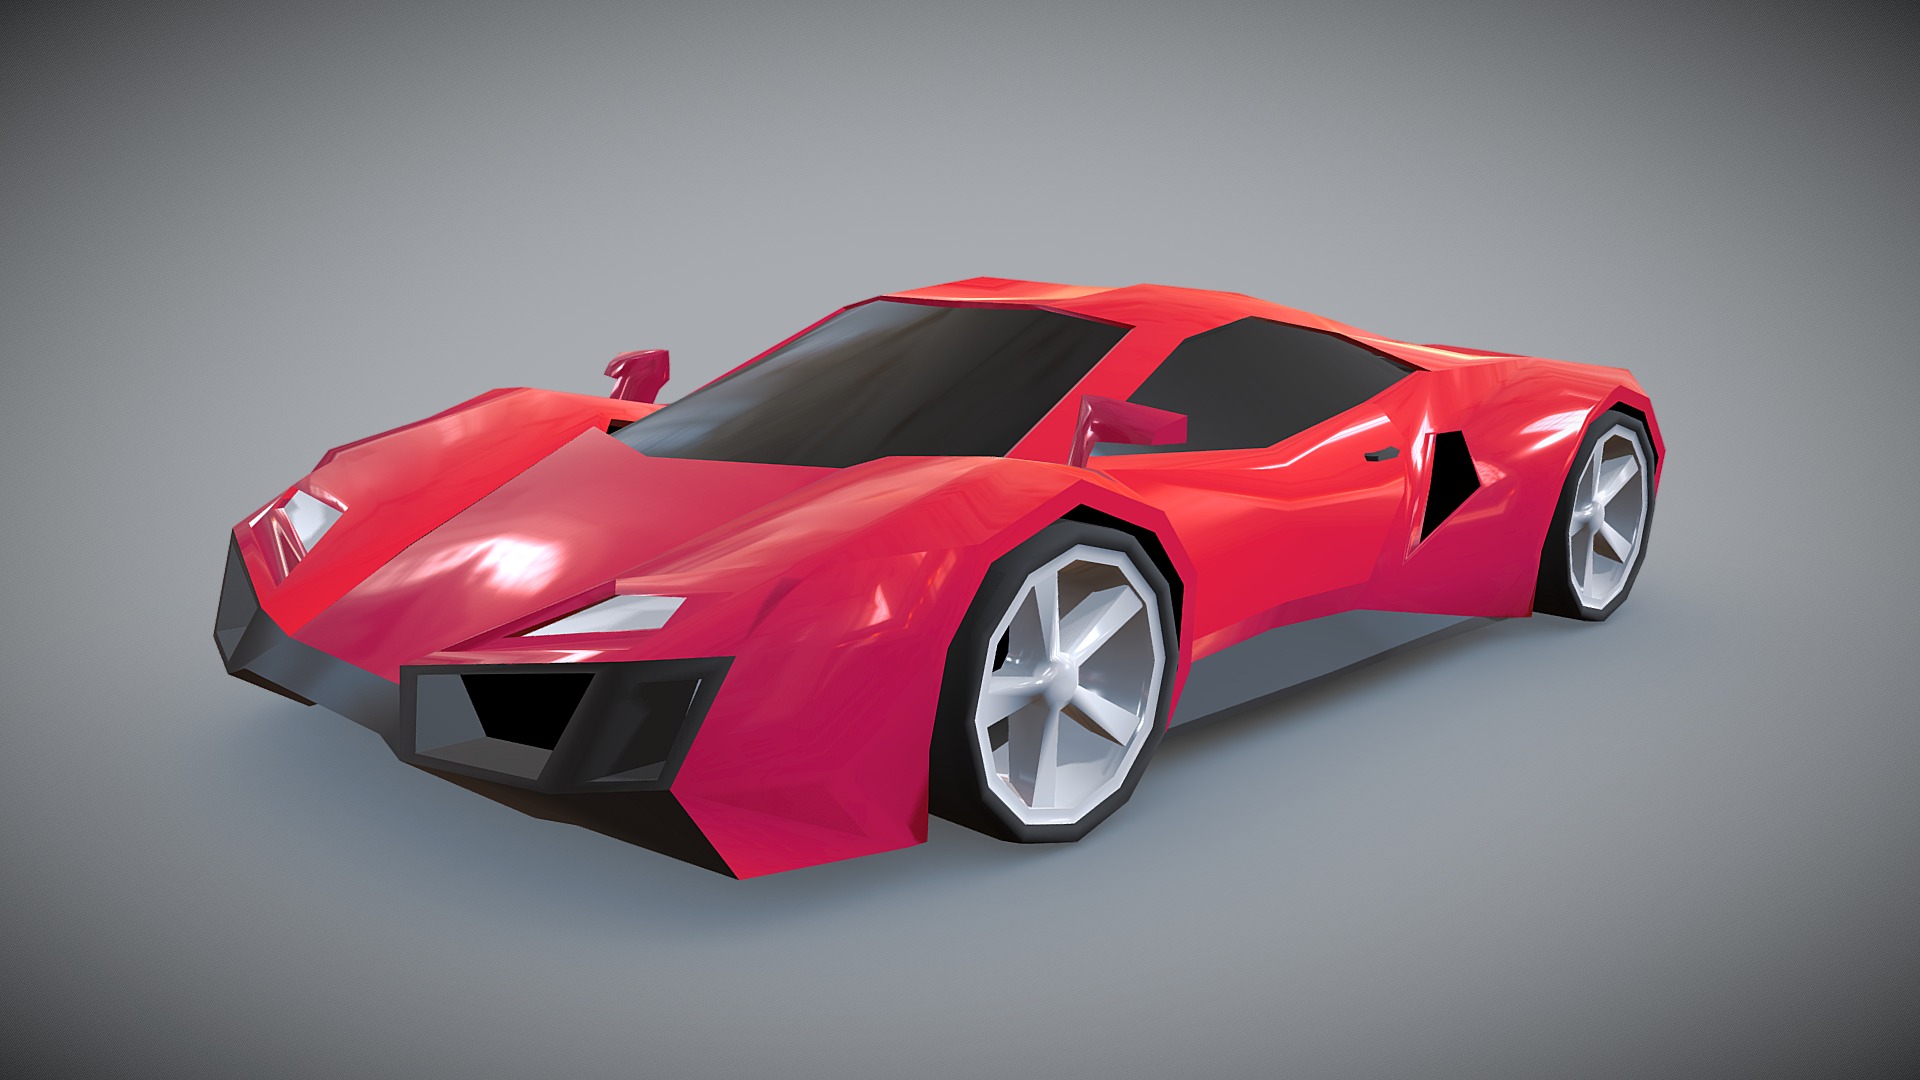 3D model Lowpoly Sportscar concept - This is a 3D model of the Lowpoly Sportscar concept. The 3D model is about a red sports car.